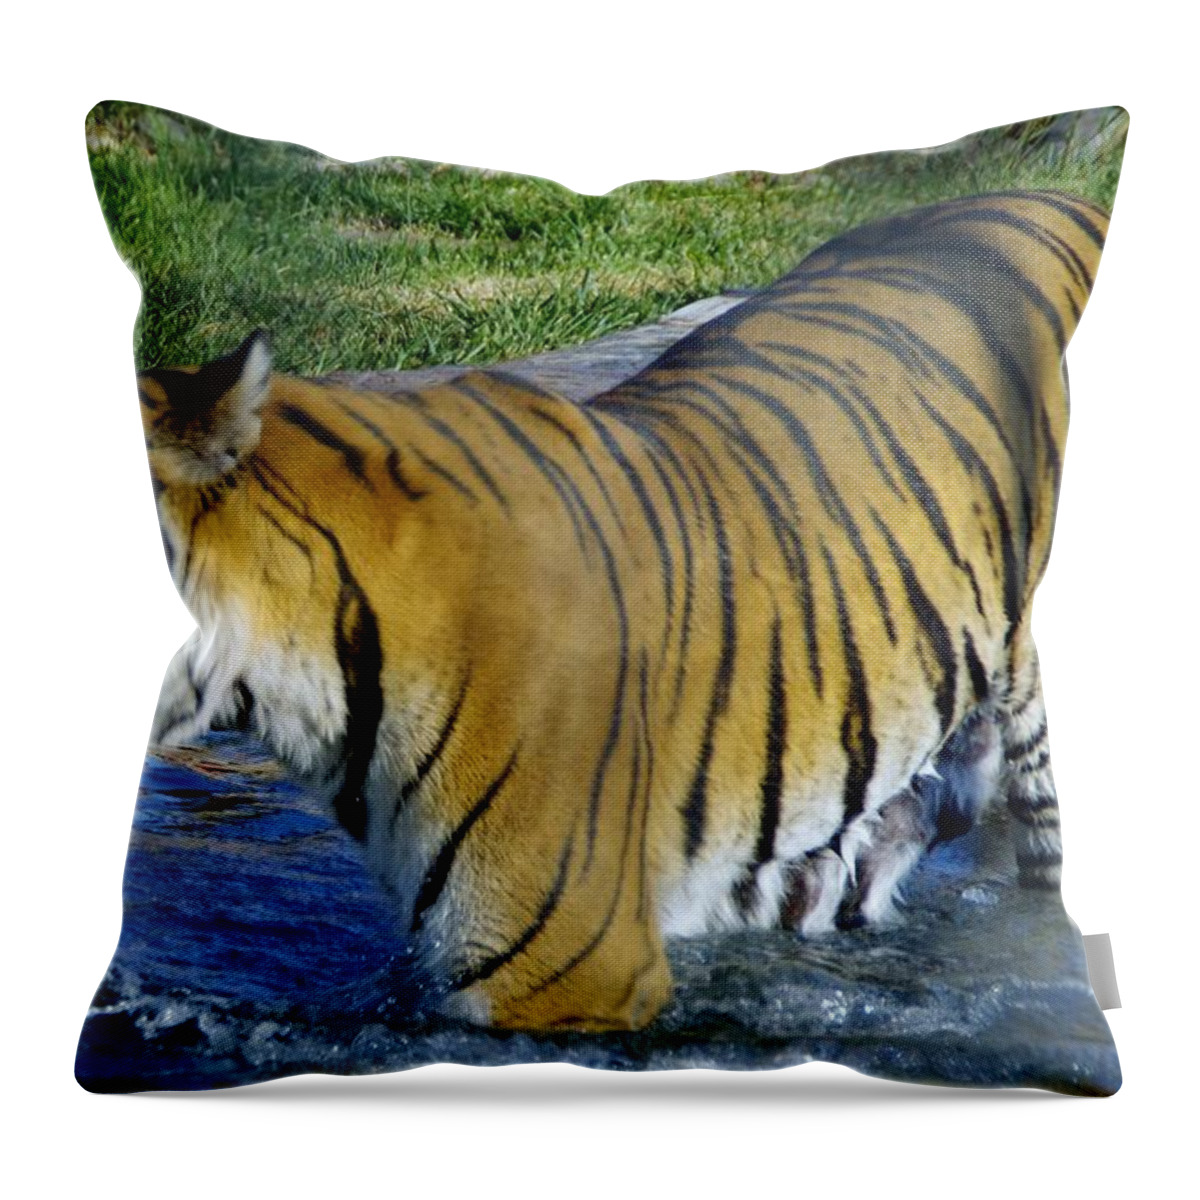 Lions Tigers And Bears Throw Pillow featuring the photograph Tiger 4 by Phyllis Spoor